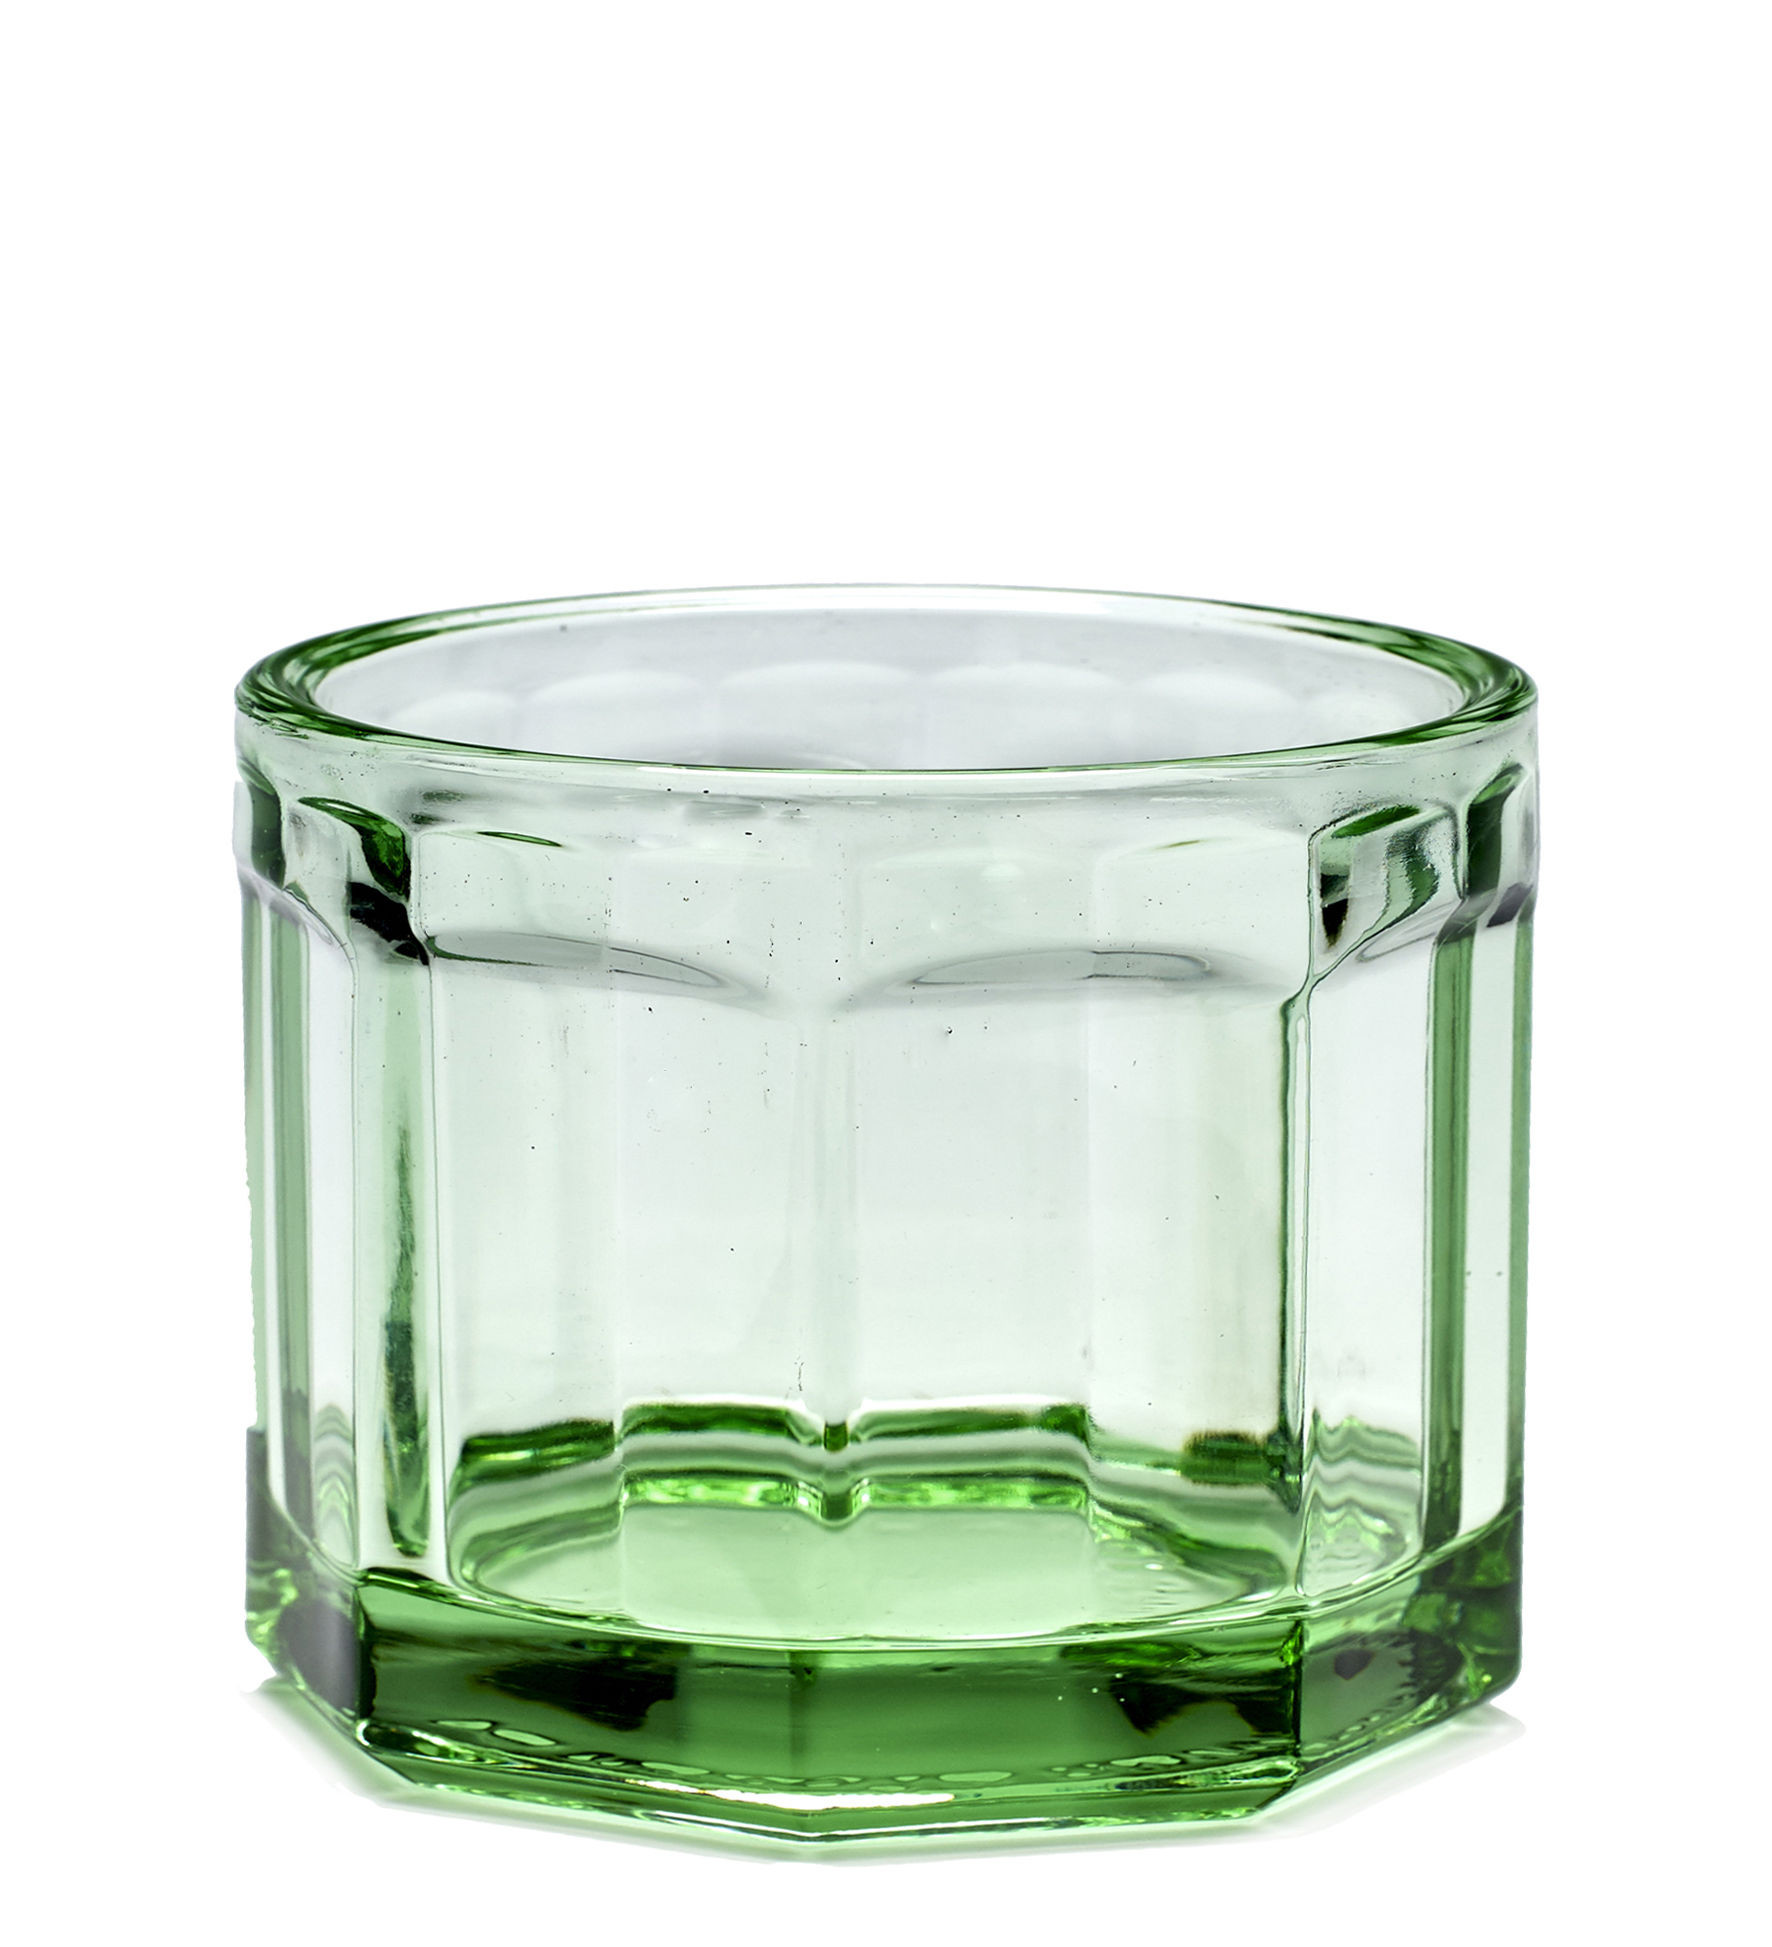 28 Unique Small Green Glass Vase 2024 free download small green glass vase of fish fish small glass 16 cl transparent green by serax made in regarding fish fish small glass 16 cl transparent green by serax made in design uk